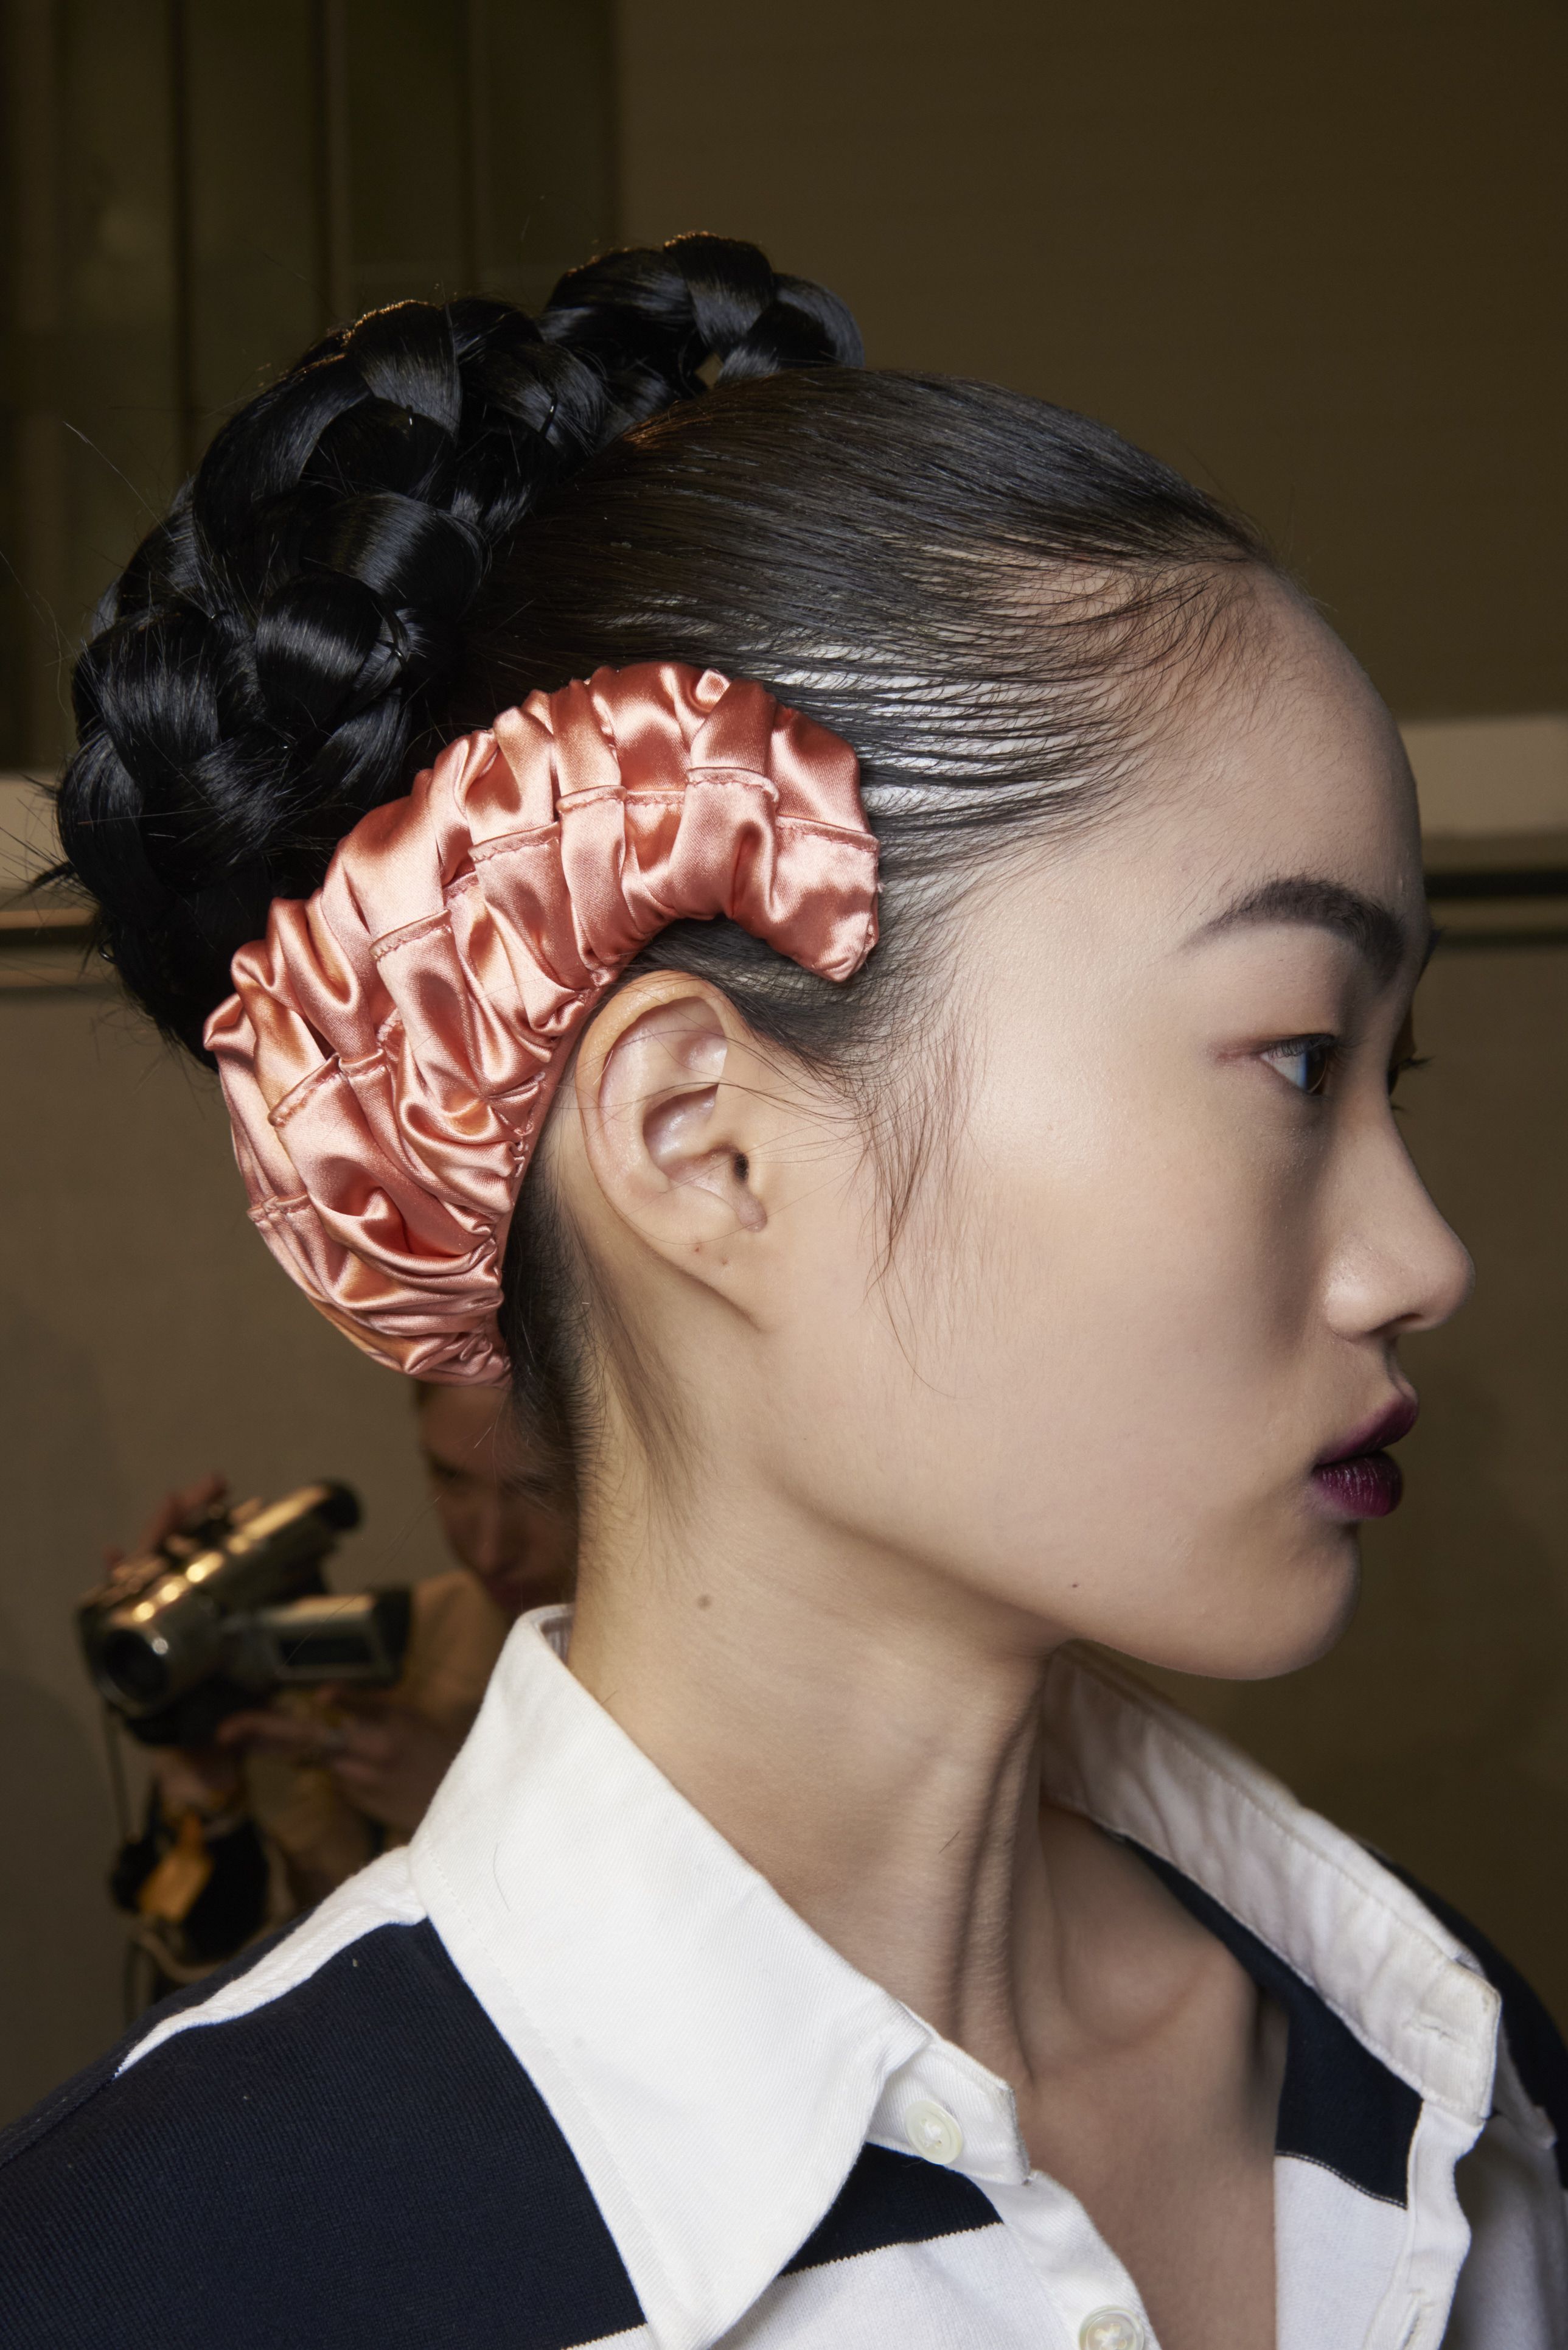 Autumn Hair Accessory Trends    The Hair Accessories You Need